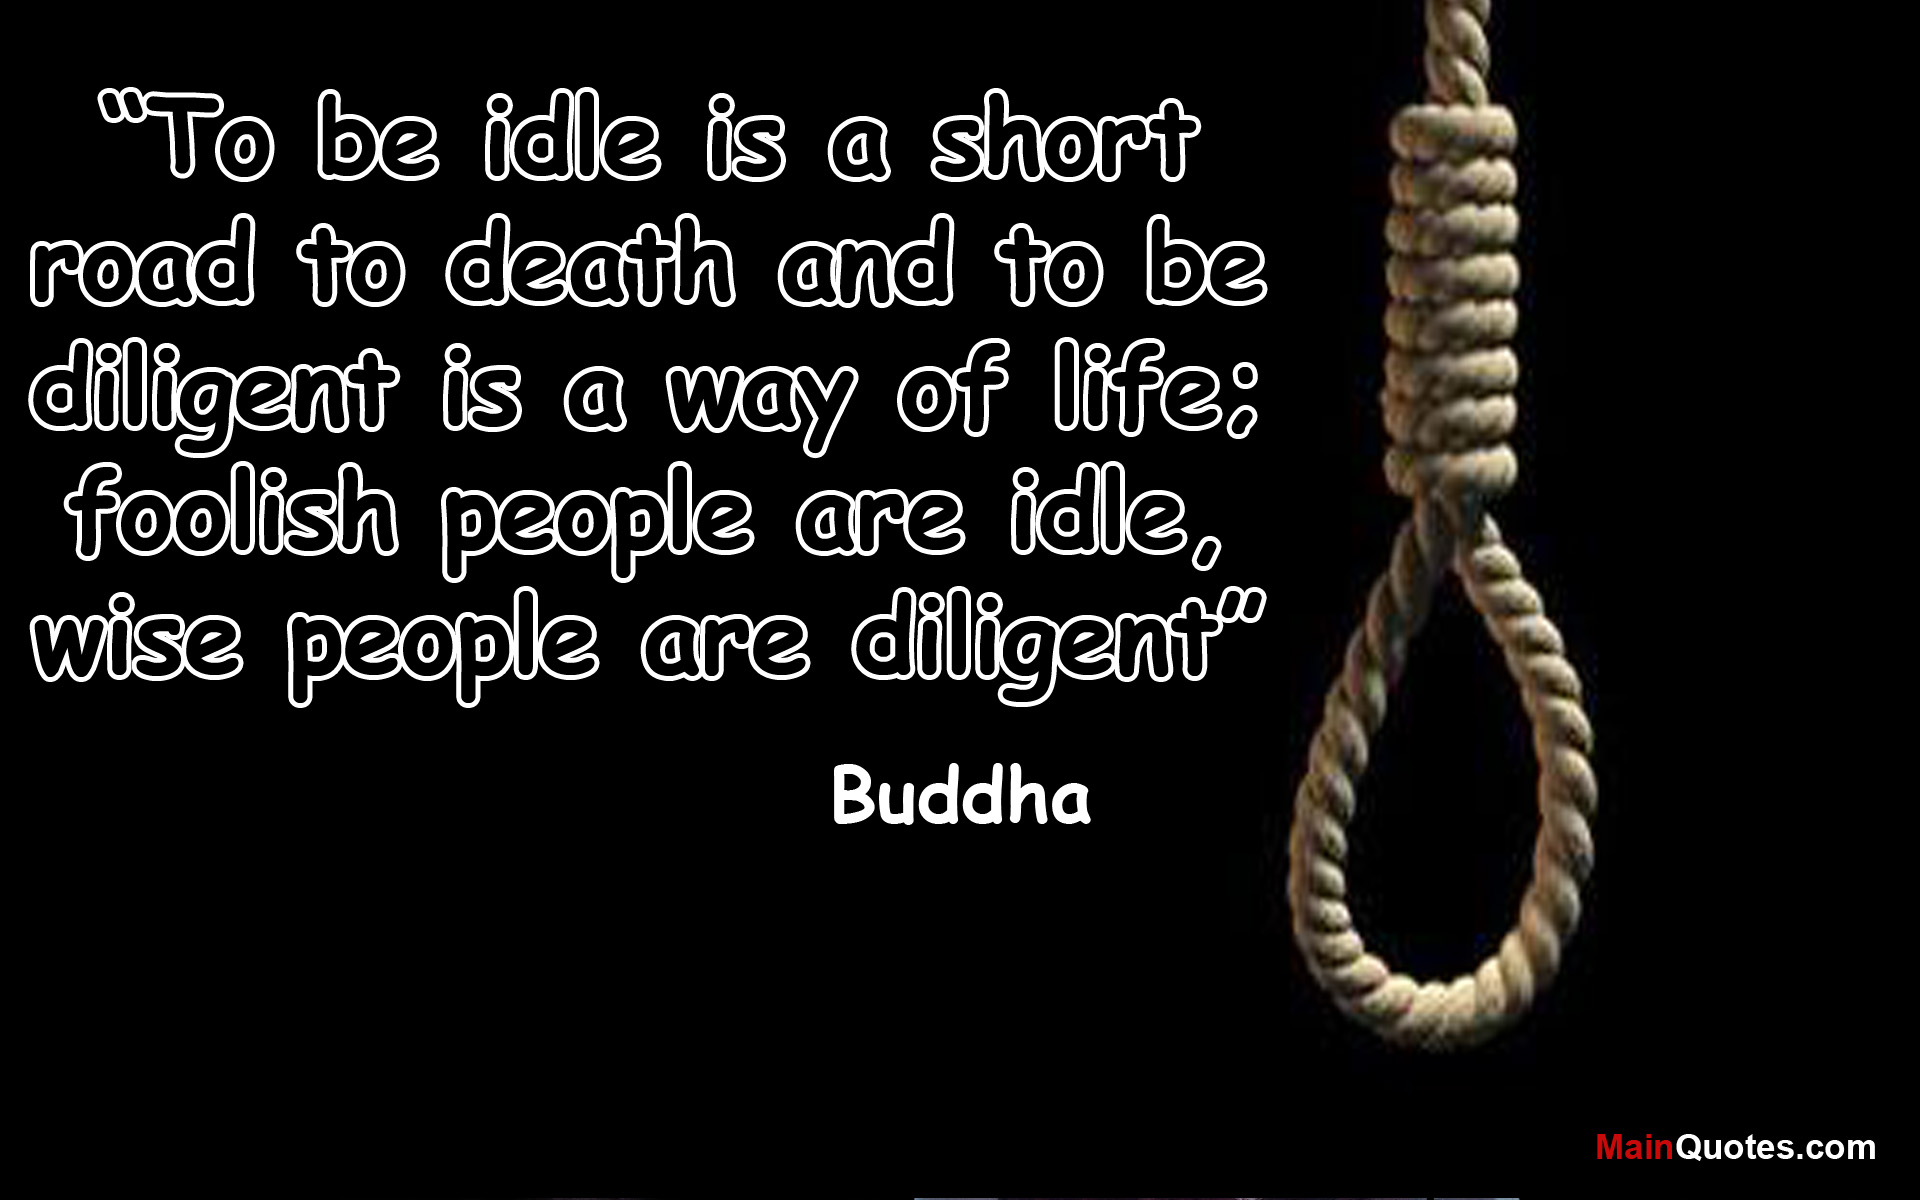 To be idle is a short road to death and to be diligent is a way of life; foolish people are idle, wise people are diligent. Buddha